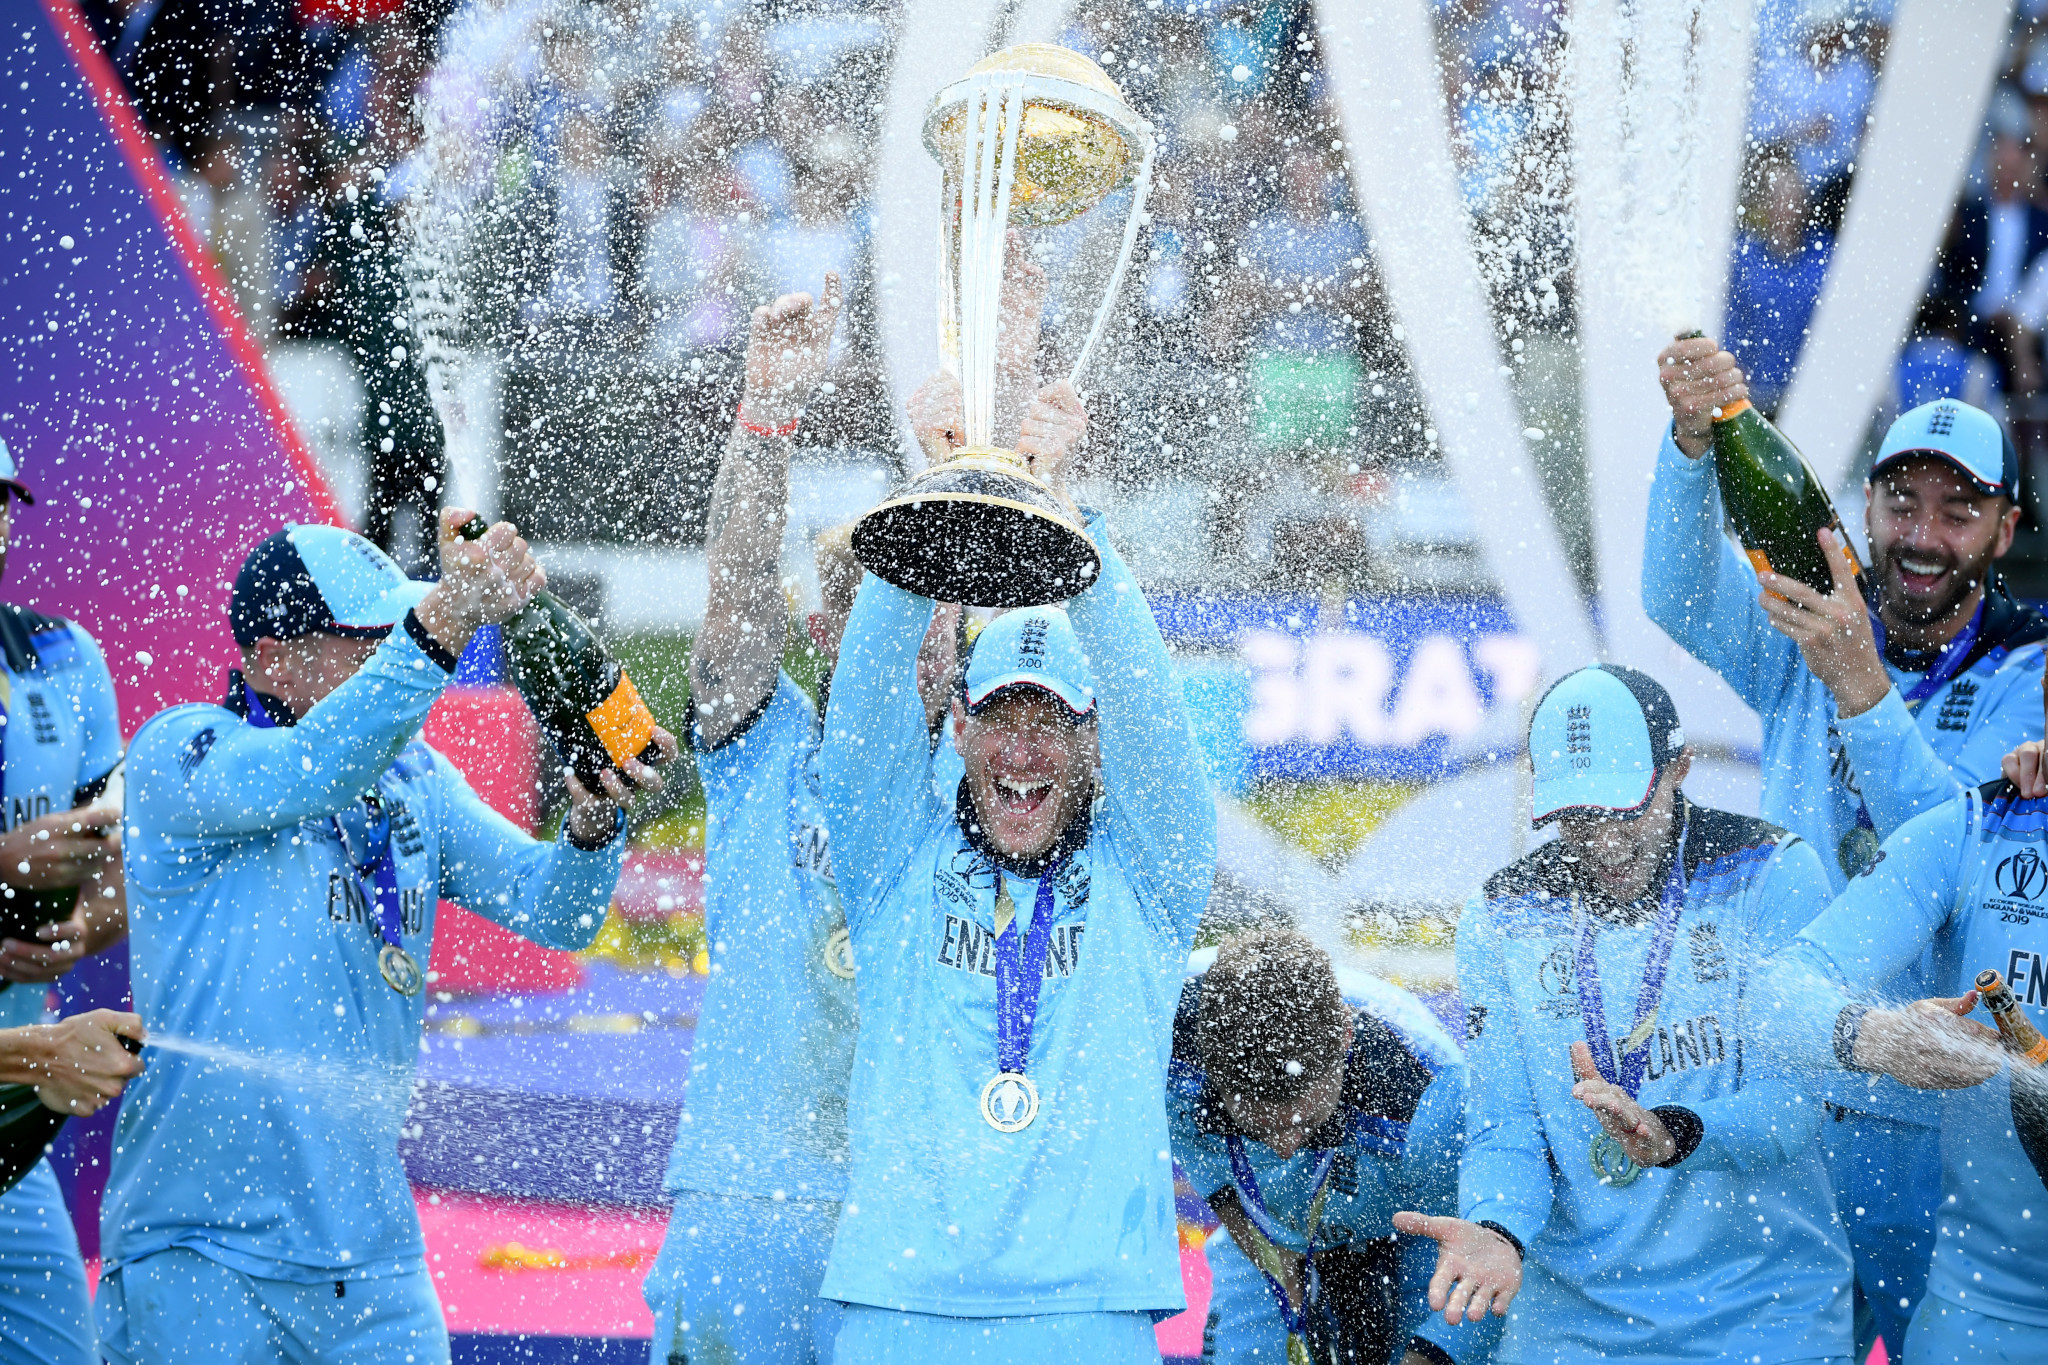 England captain Eoin Morgan lifts the ICC Men's World Cup after his team had beaten New Zealand in a dramatic final at Lord's in London ©Getty Images